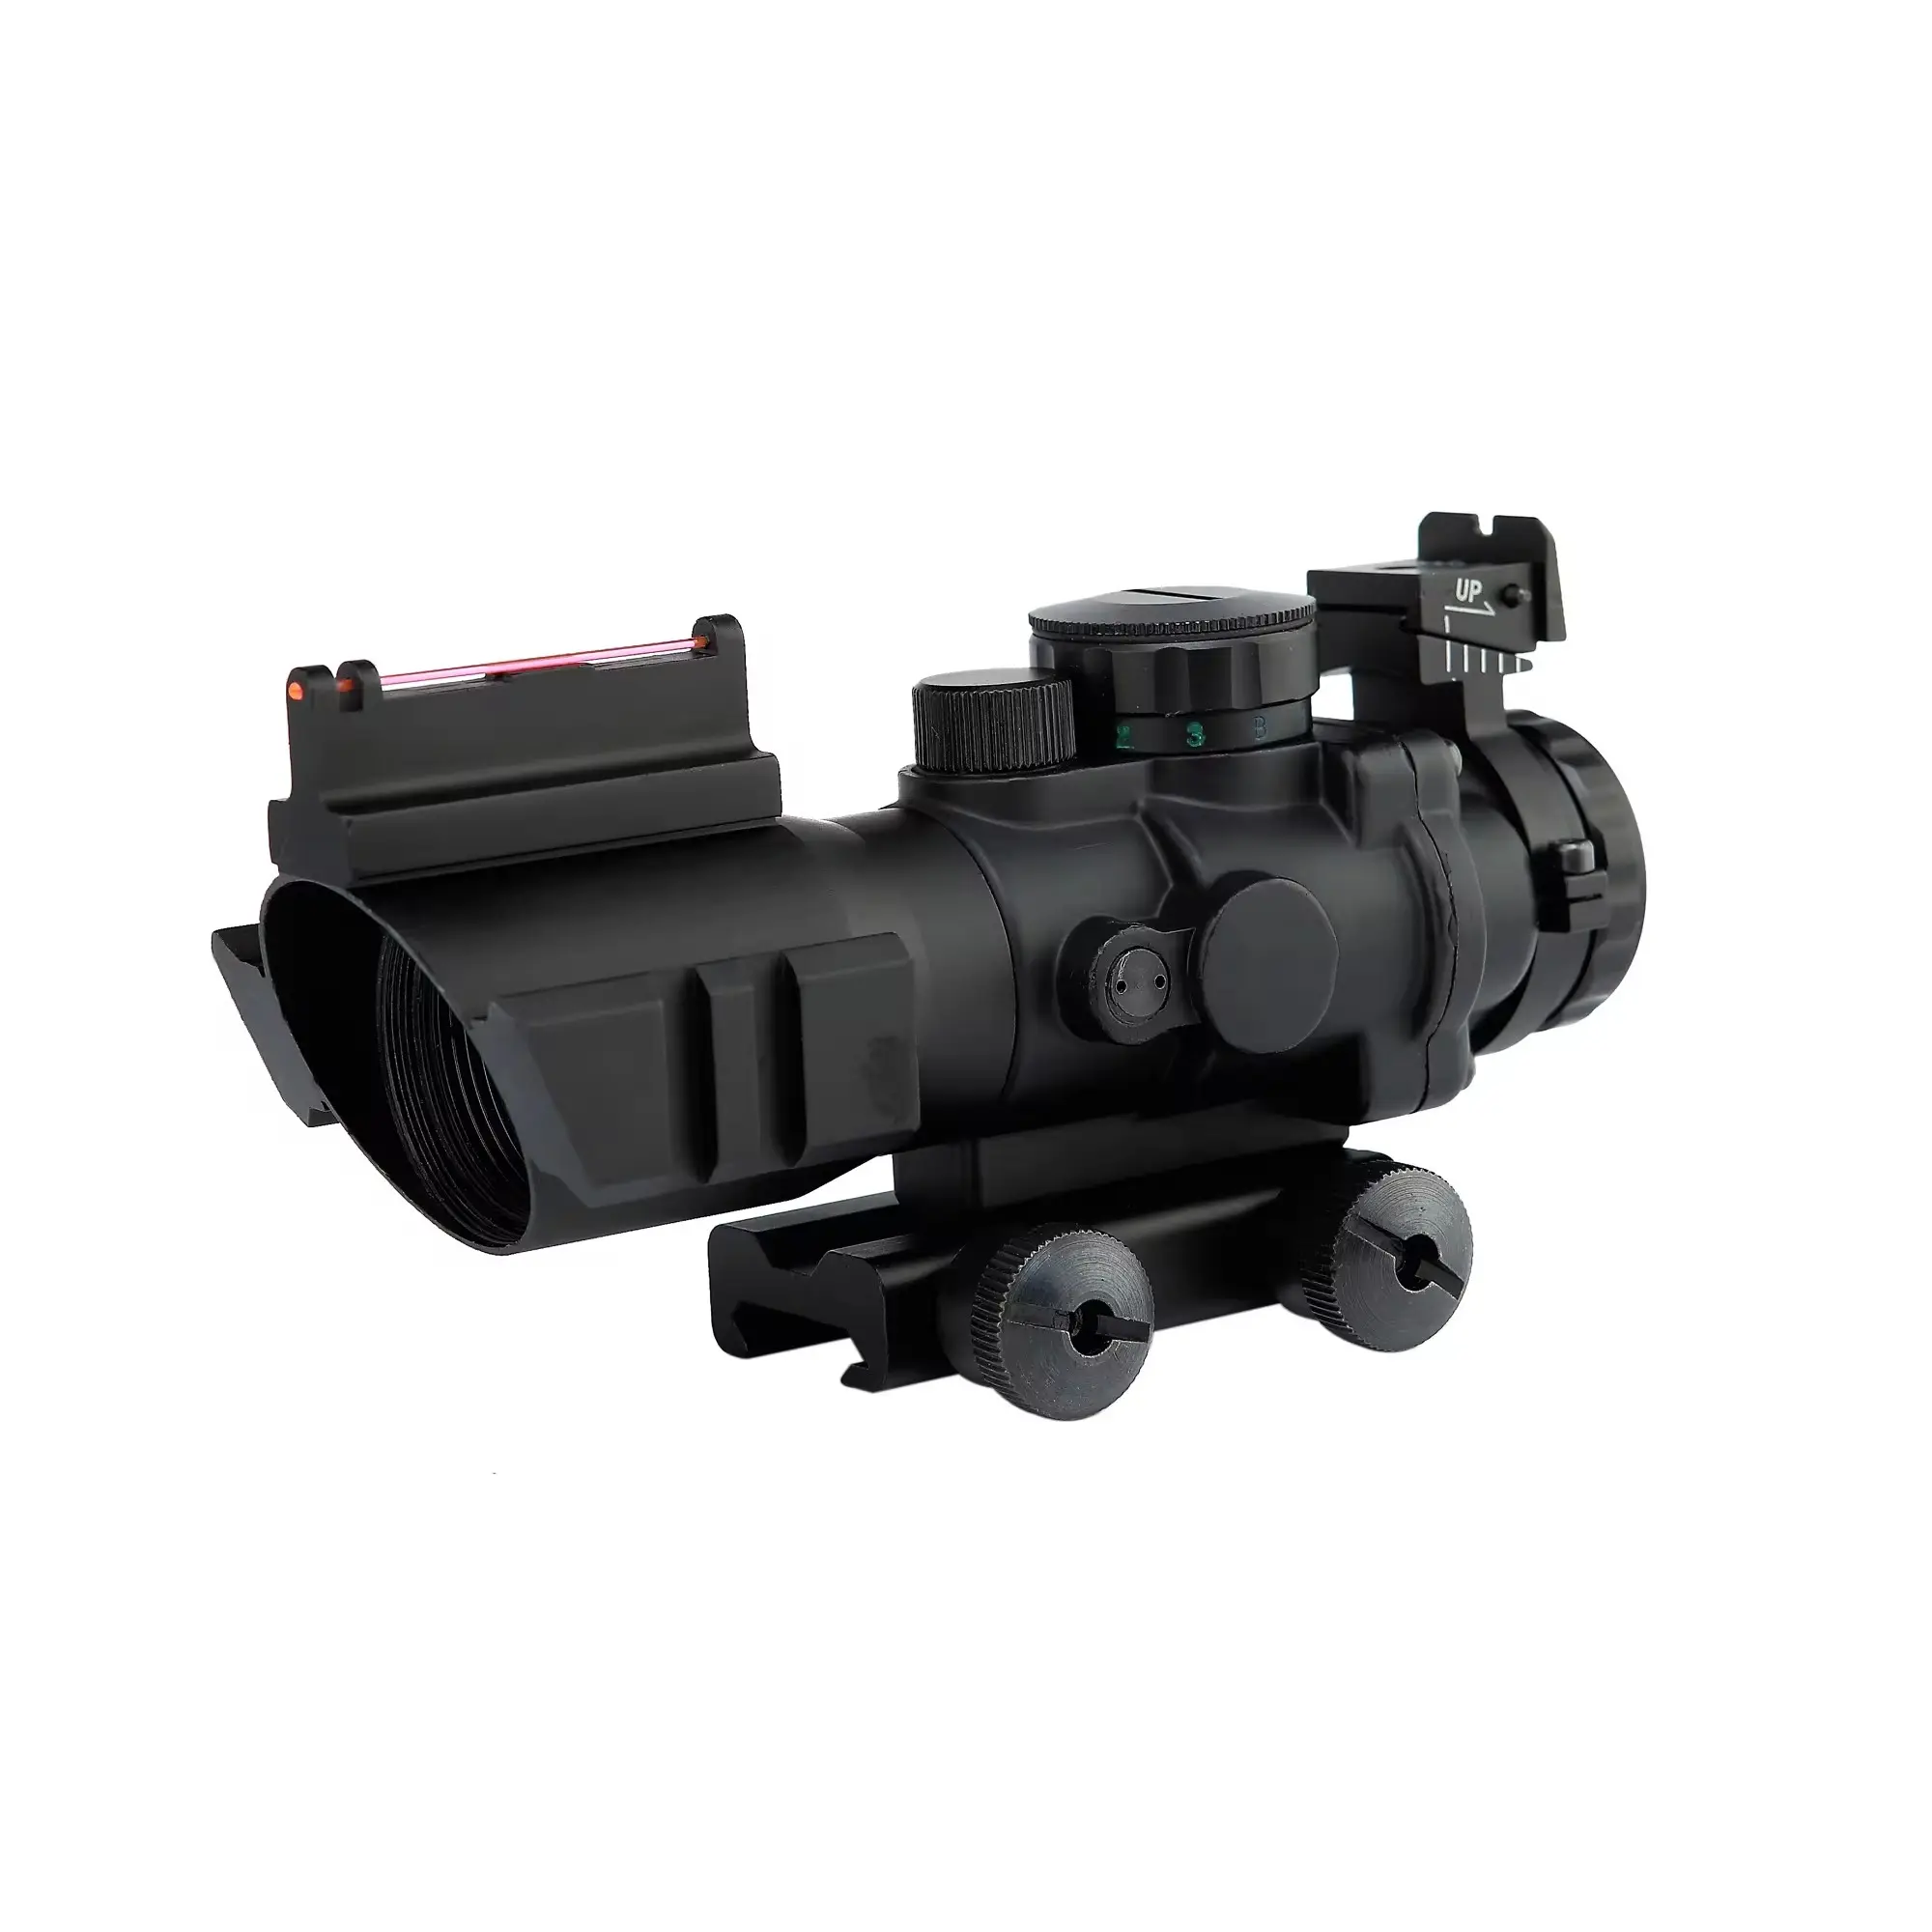 Hunting Prism Sight 4X32 Scope Red/Green/Blue Reticle Optical Sight